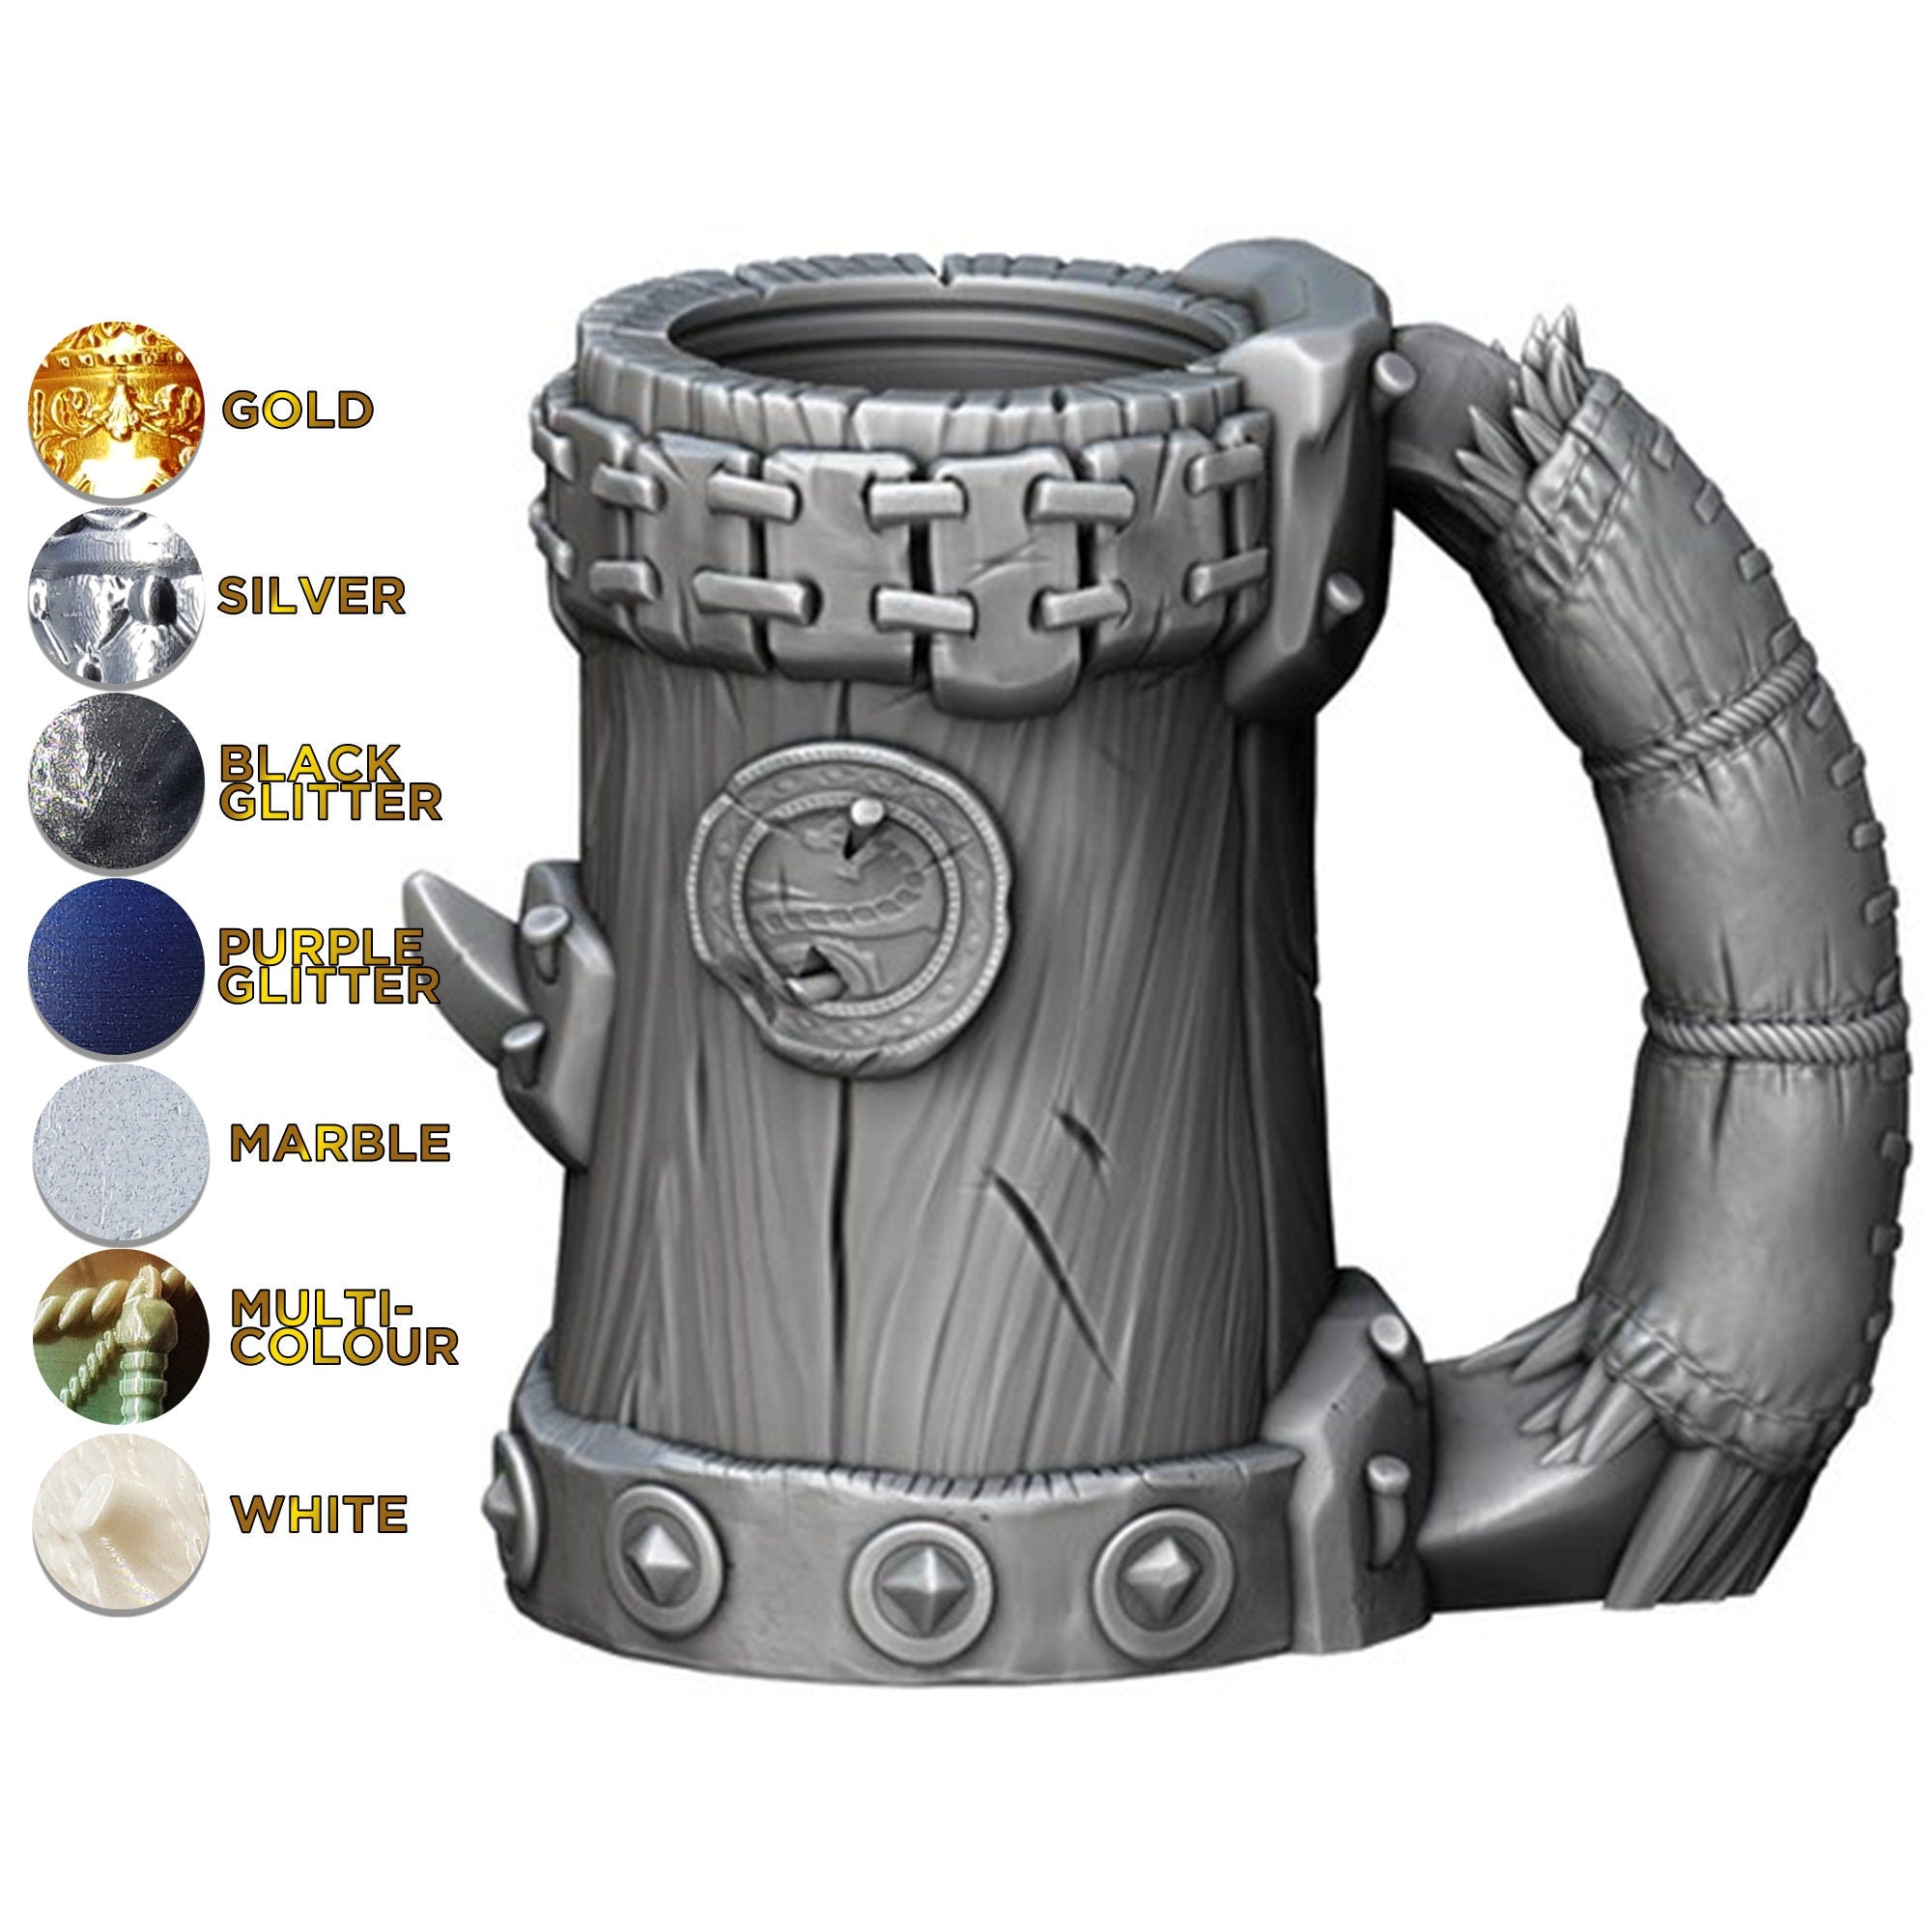 The HALF ORC | Mythic Mug | Larp | Gaming Zubehör | Tabletop | Dice Cup | Box | Holder | Dungeons and Dragons | DnD | RPG | Fantasy-Role Playing Games